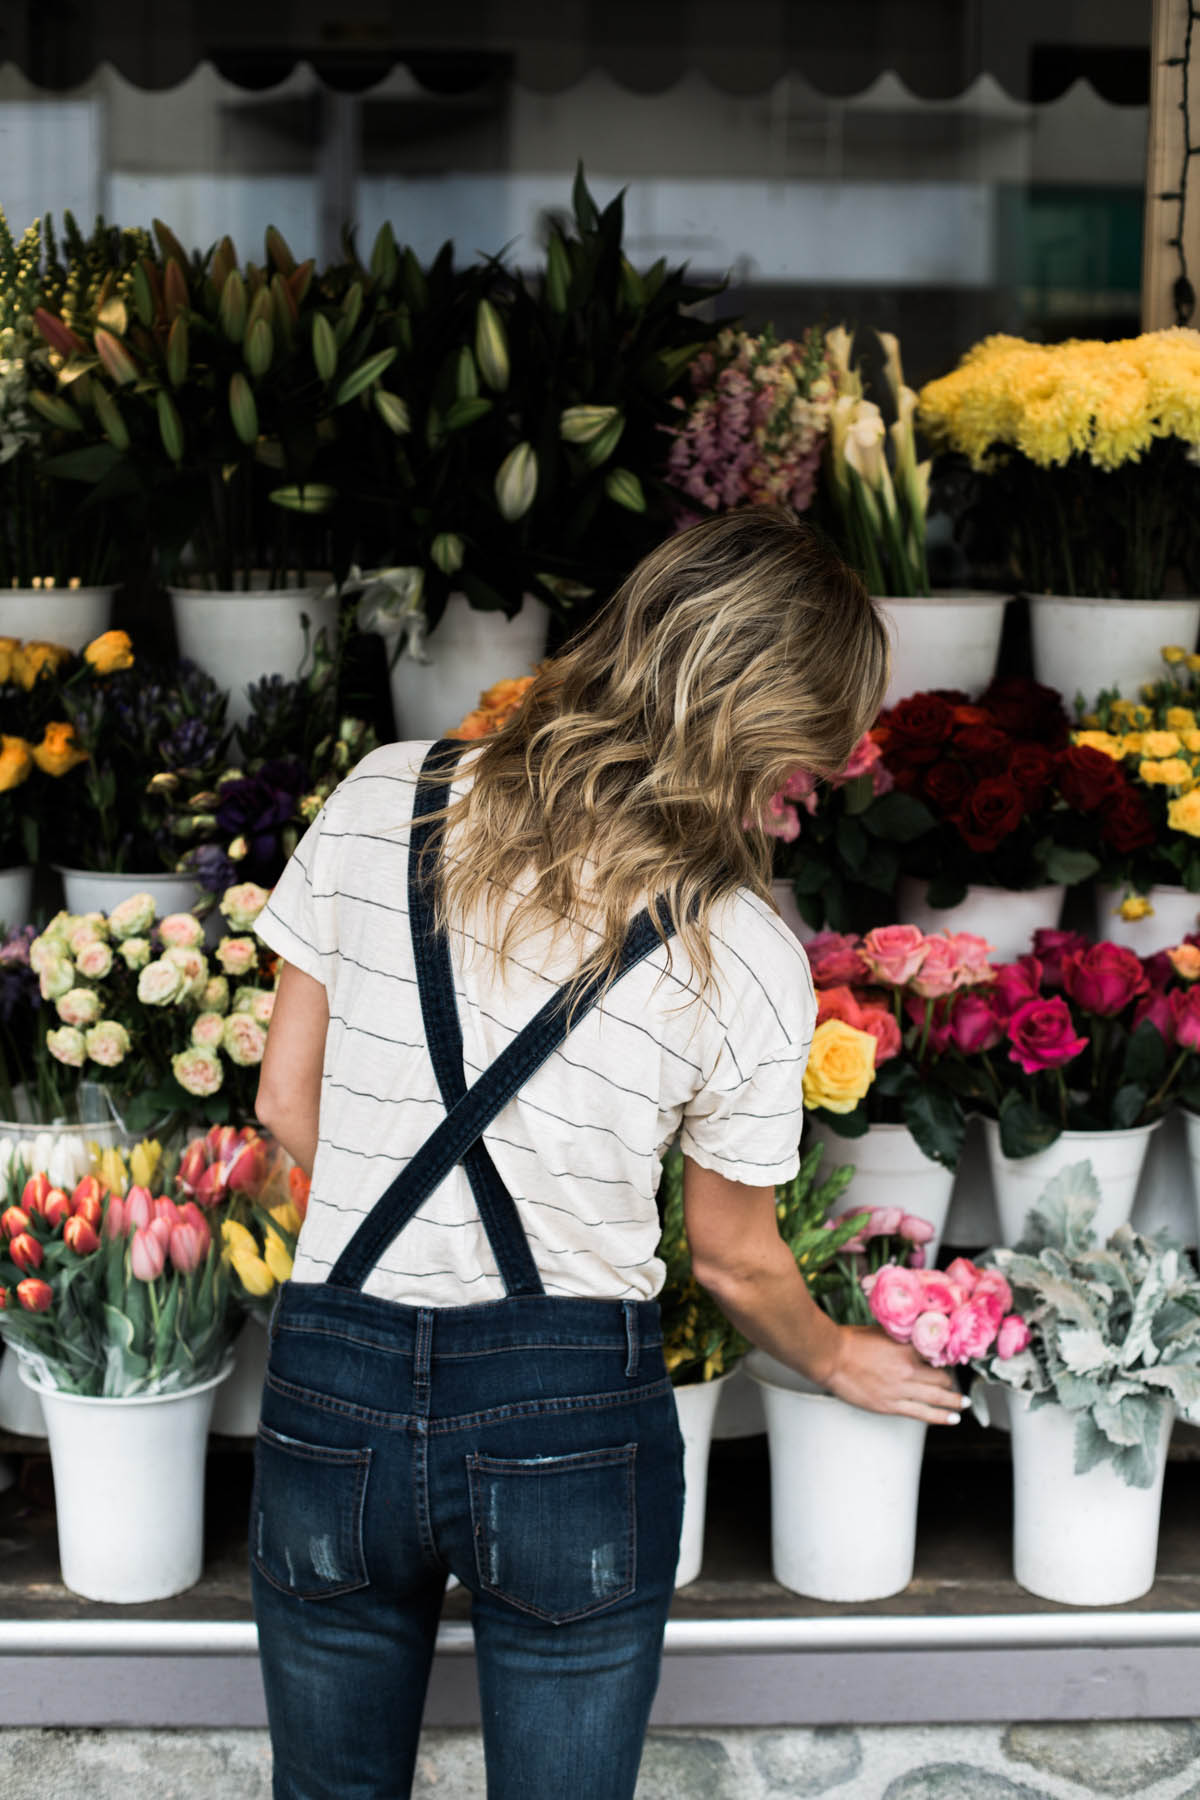 Amanda Holstein in Free People denim overalls at the Bud Stop flower stand